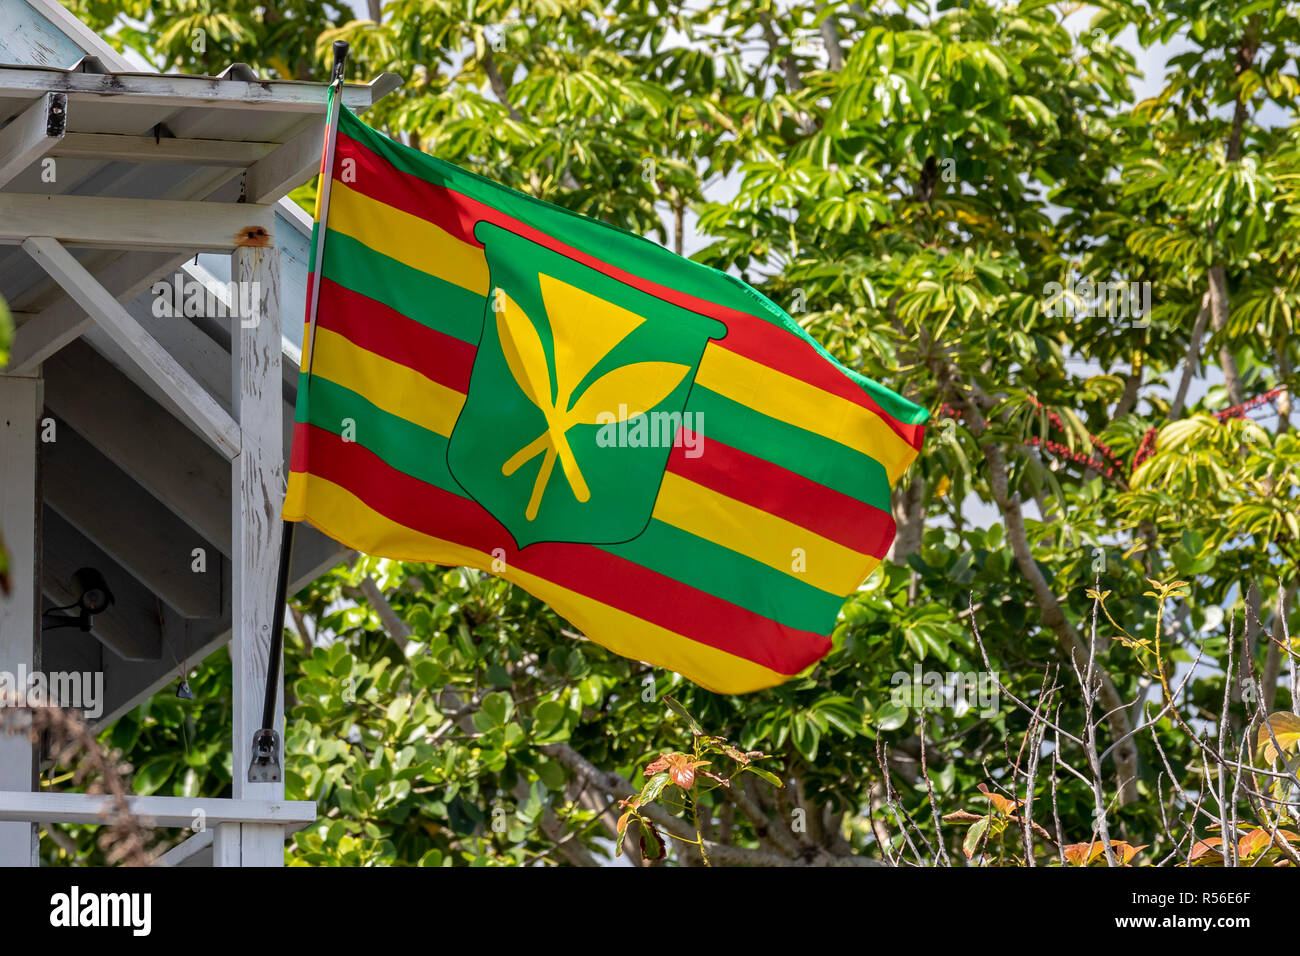 Kehena, Hawaii - The Kanaka Maoli, or Native Hawaiian, flag flying from a house in the Puna District of the Big Island. The flag is popular with those Stock Photo